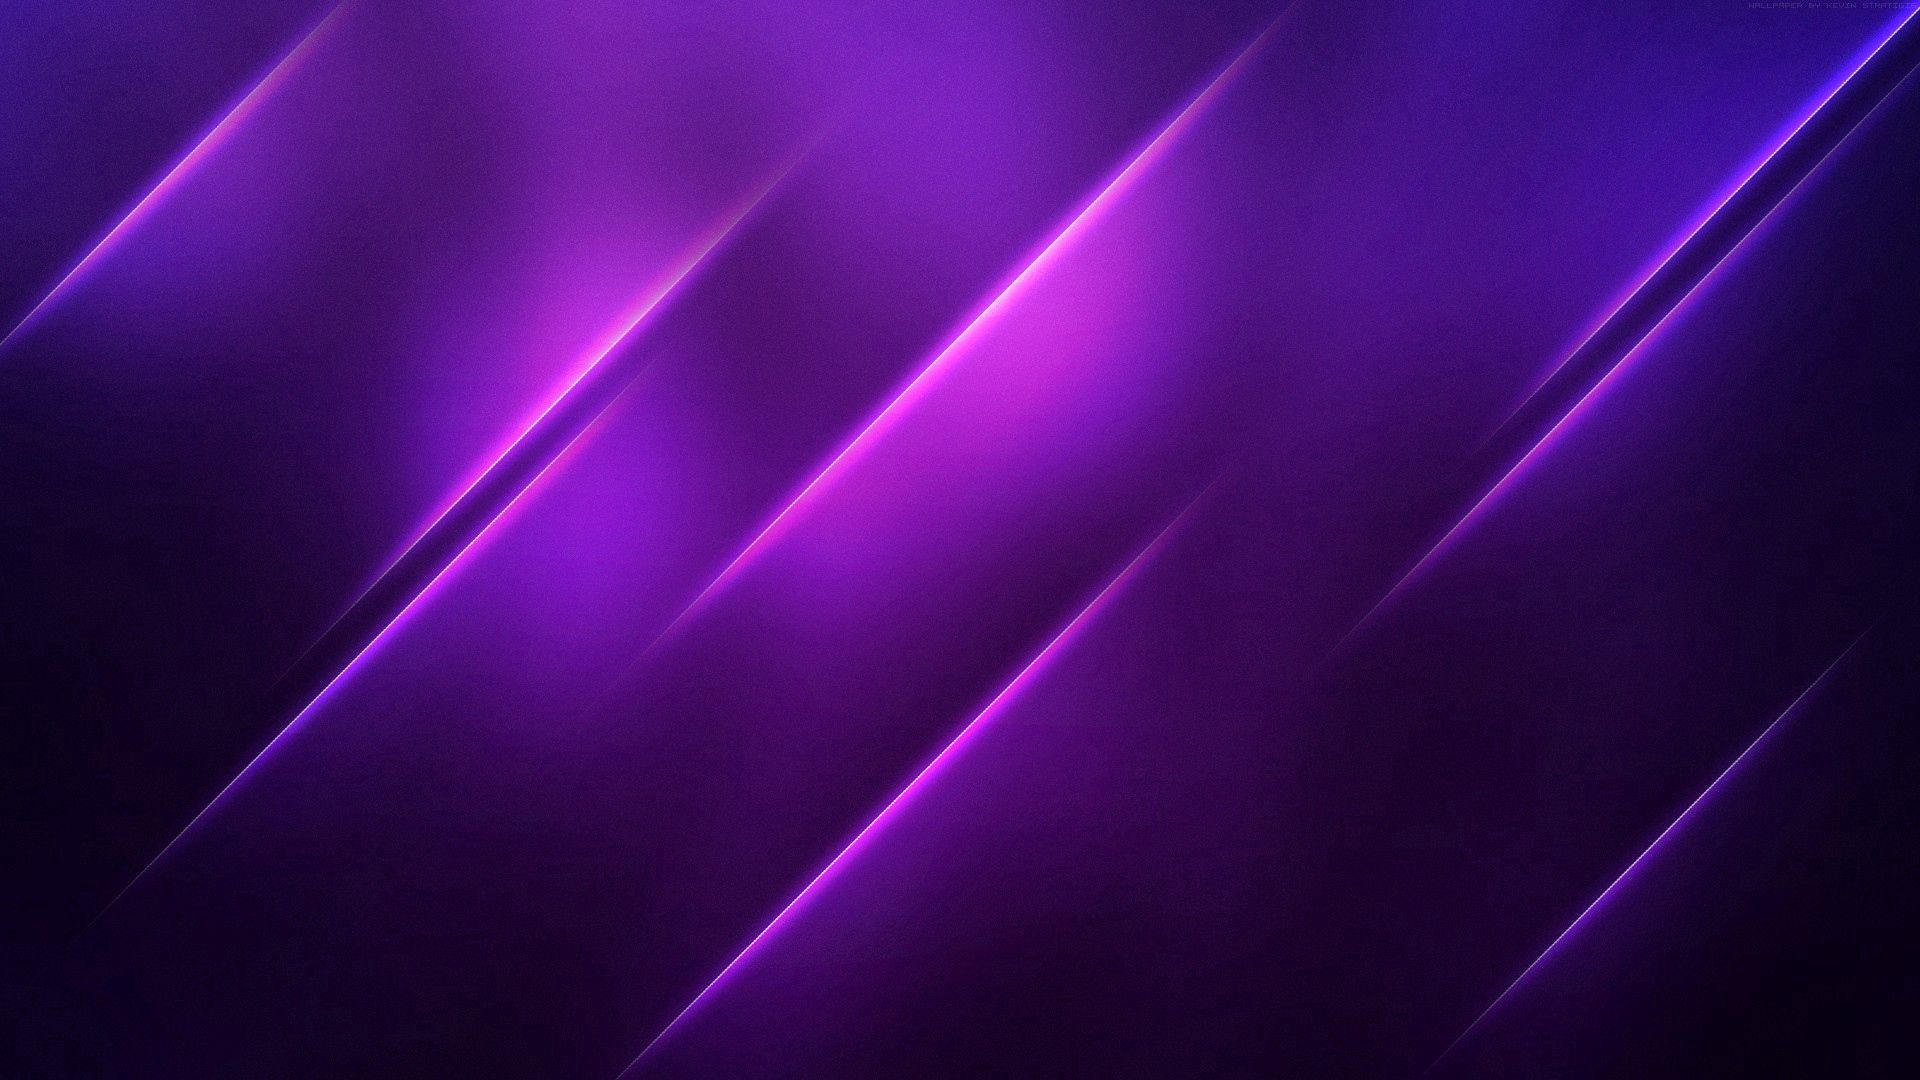 violet, obliquely, abstract, bright, lines, purple phone wallpaper